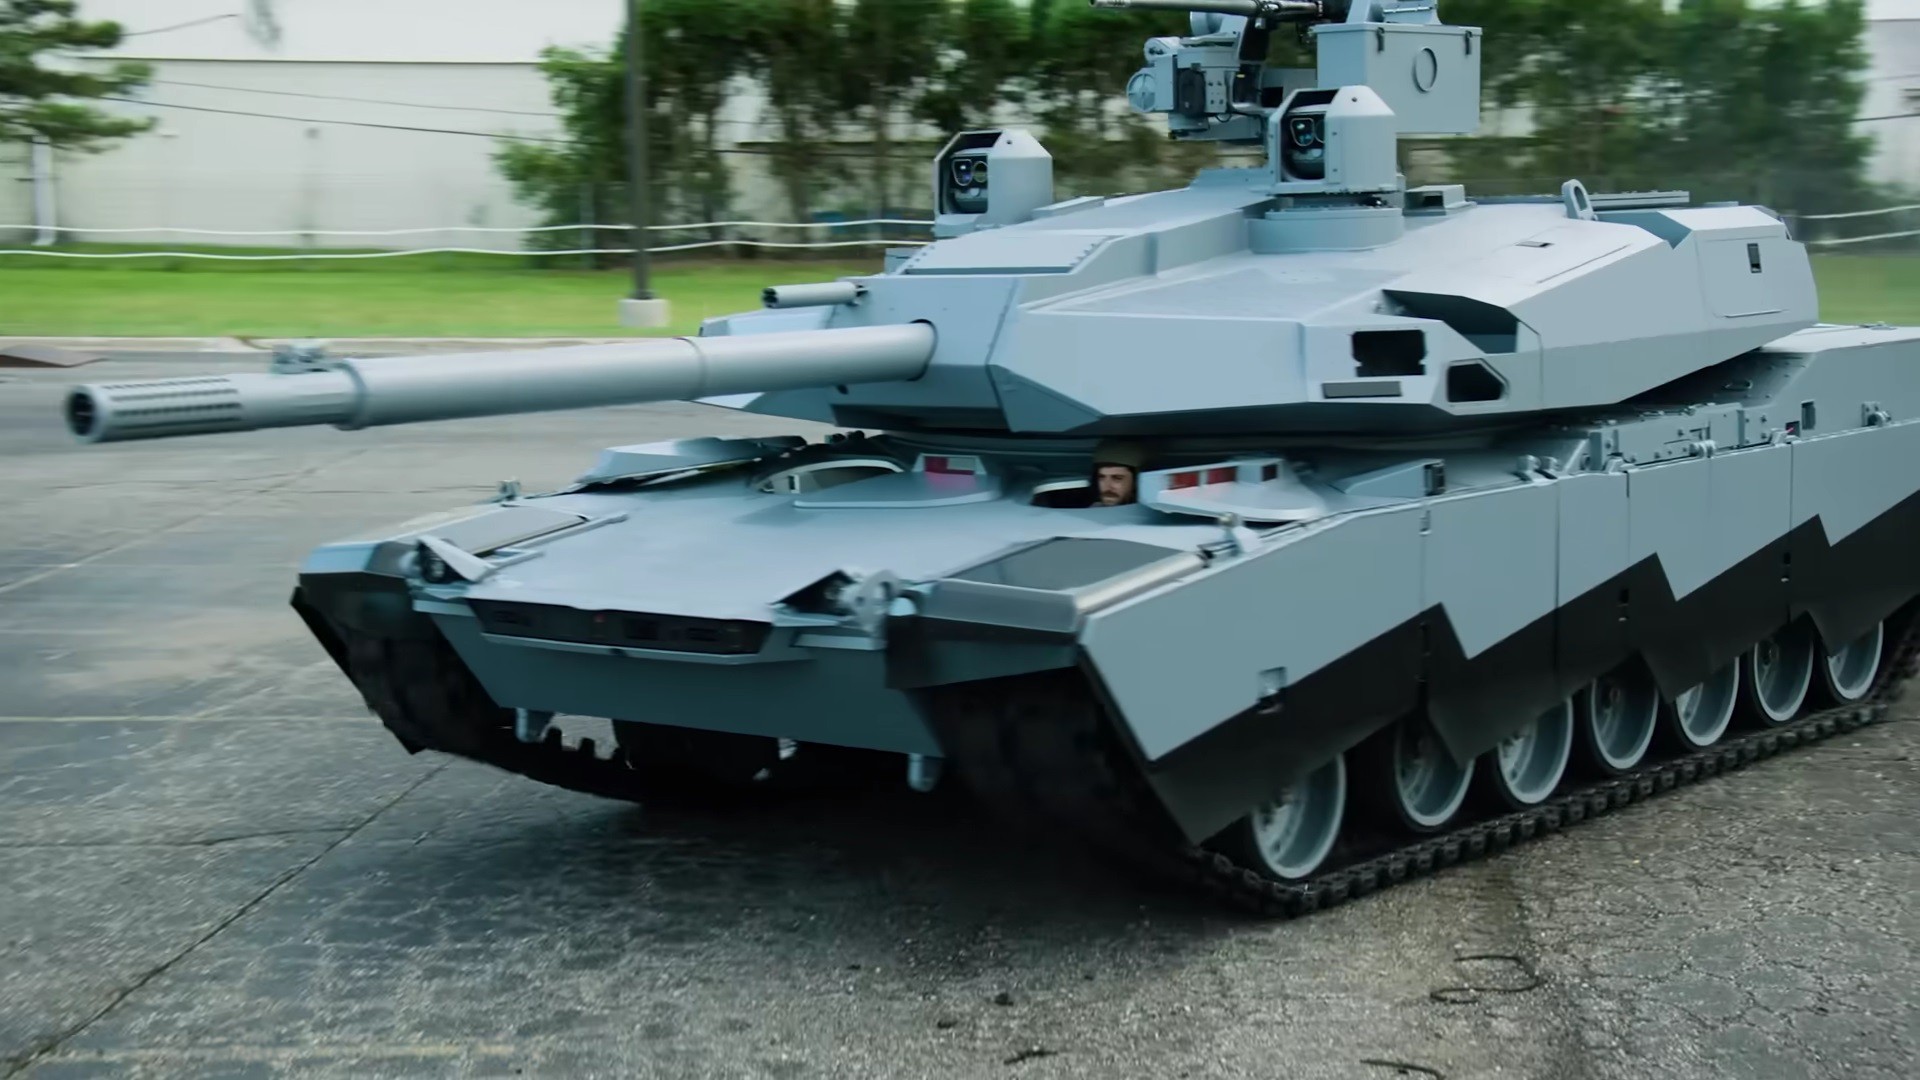 Abrams X Emerges As the Tank of the Future, YouTube Video Shows It ...